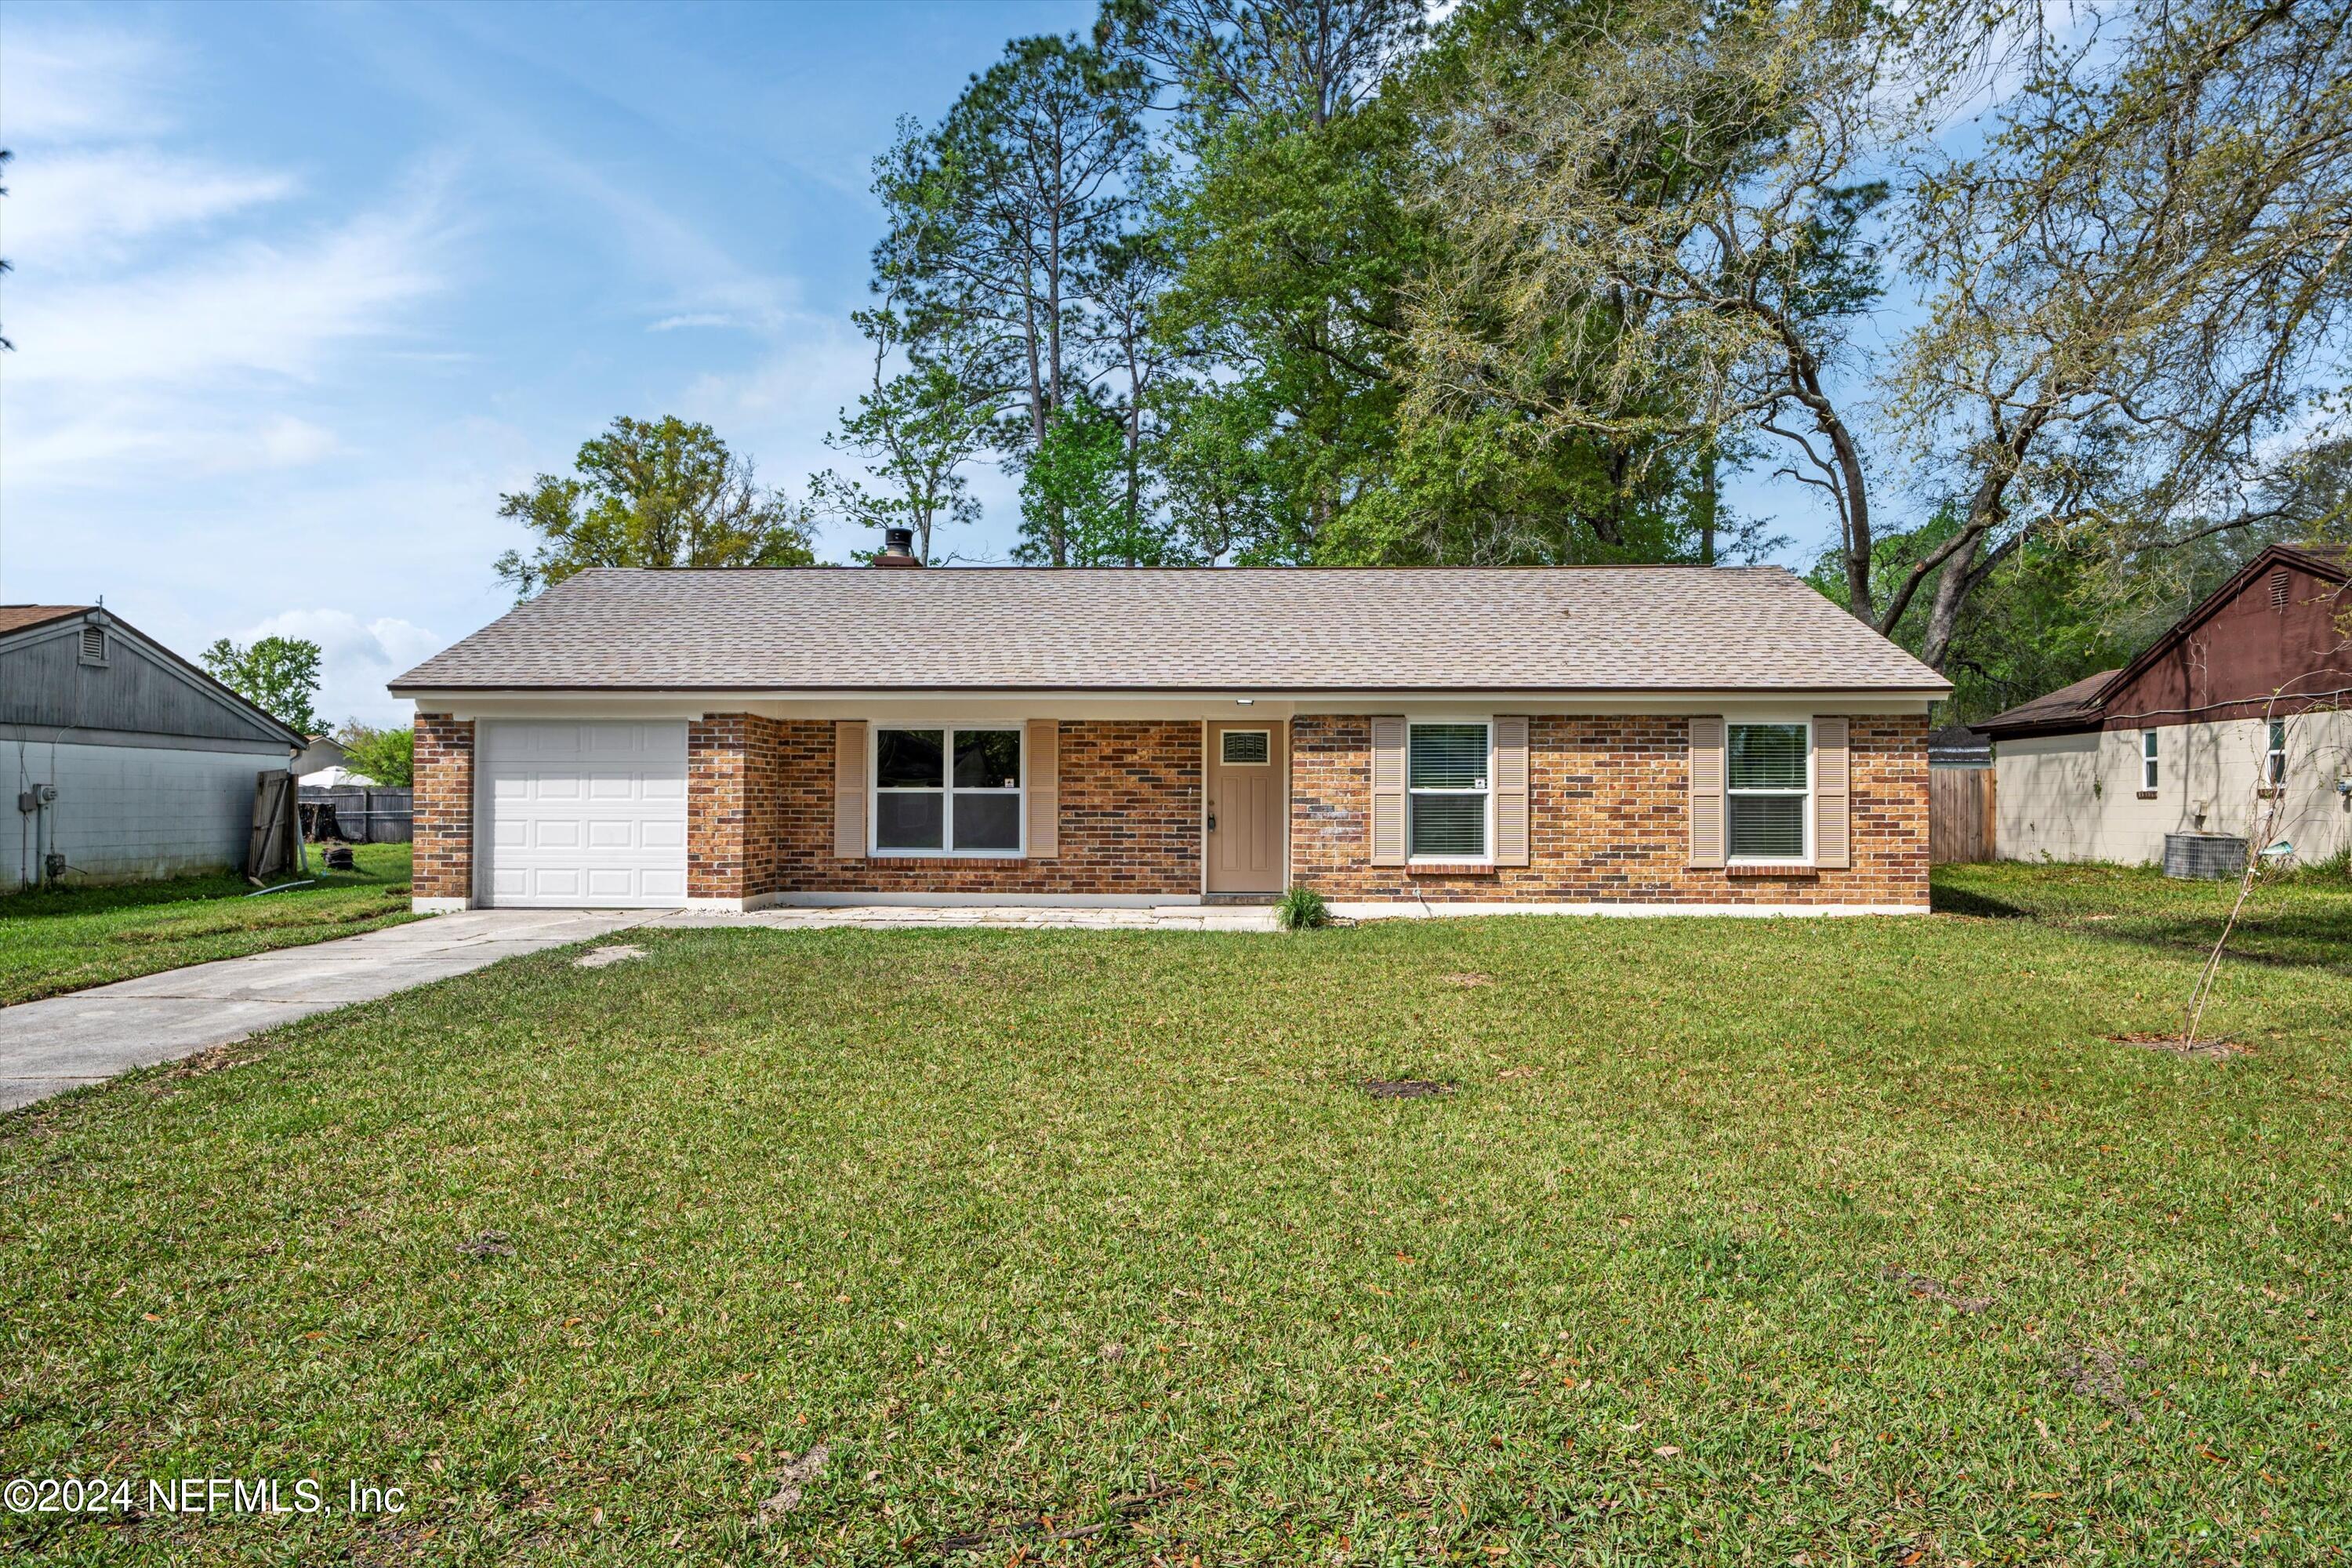 Middleburg, FL home for sale located at 1682 Donna Drive, Middleburg, FL 32068